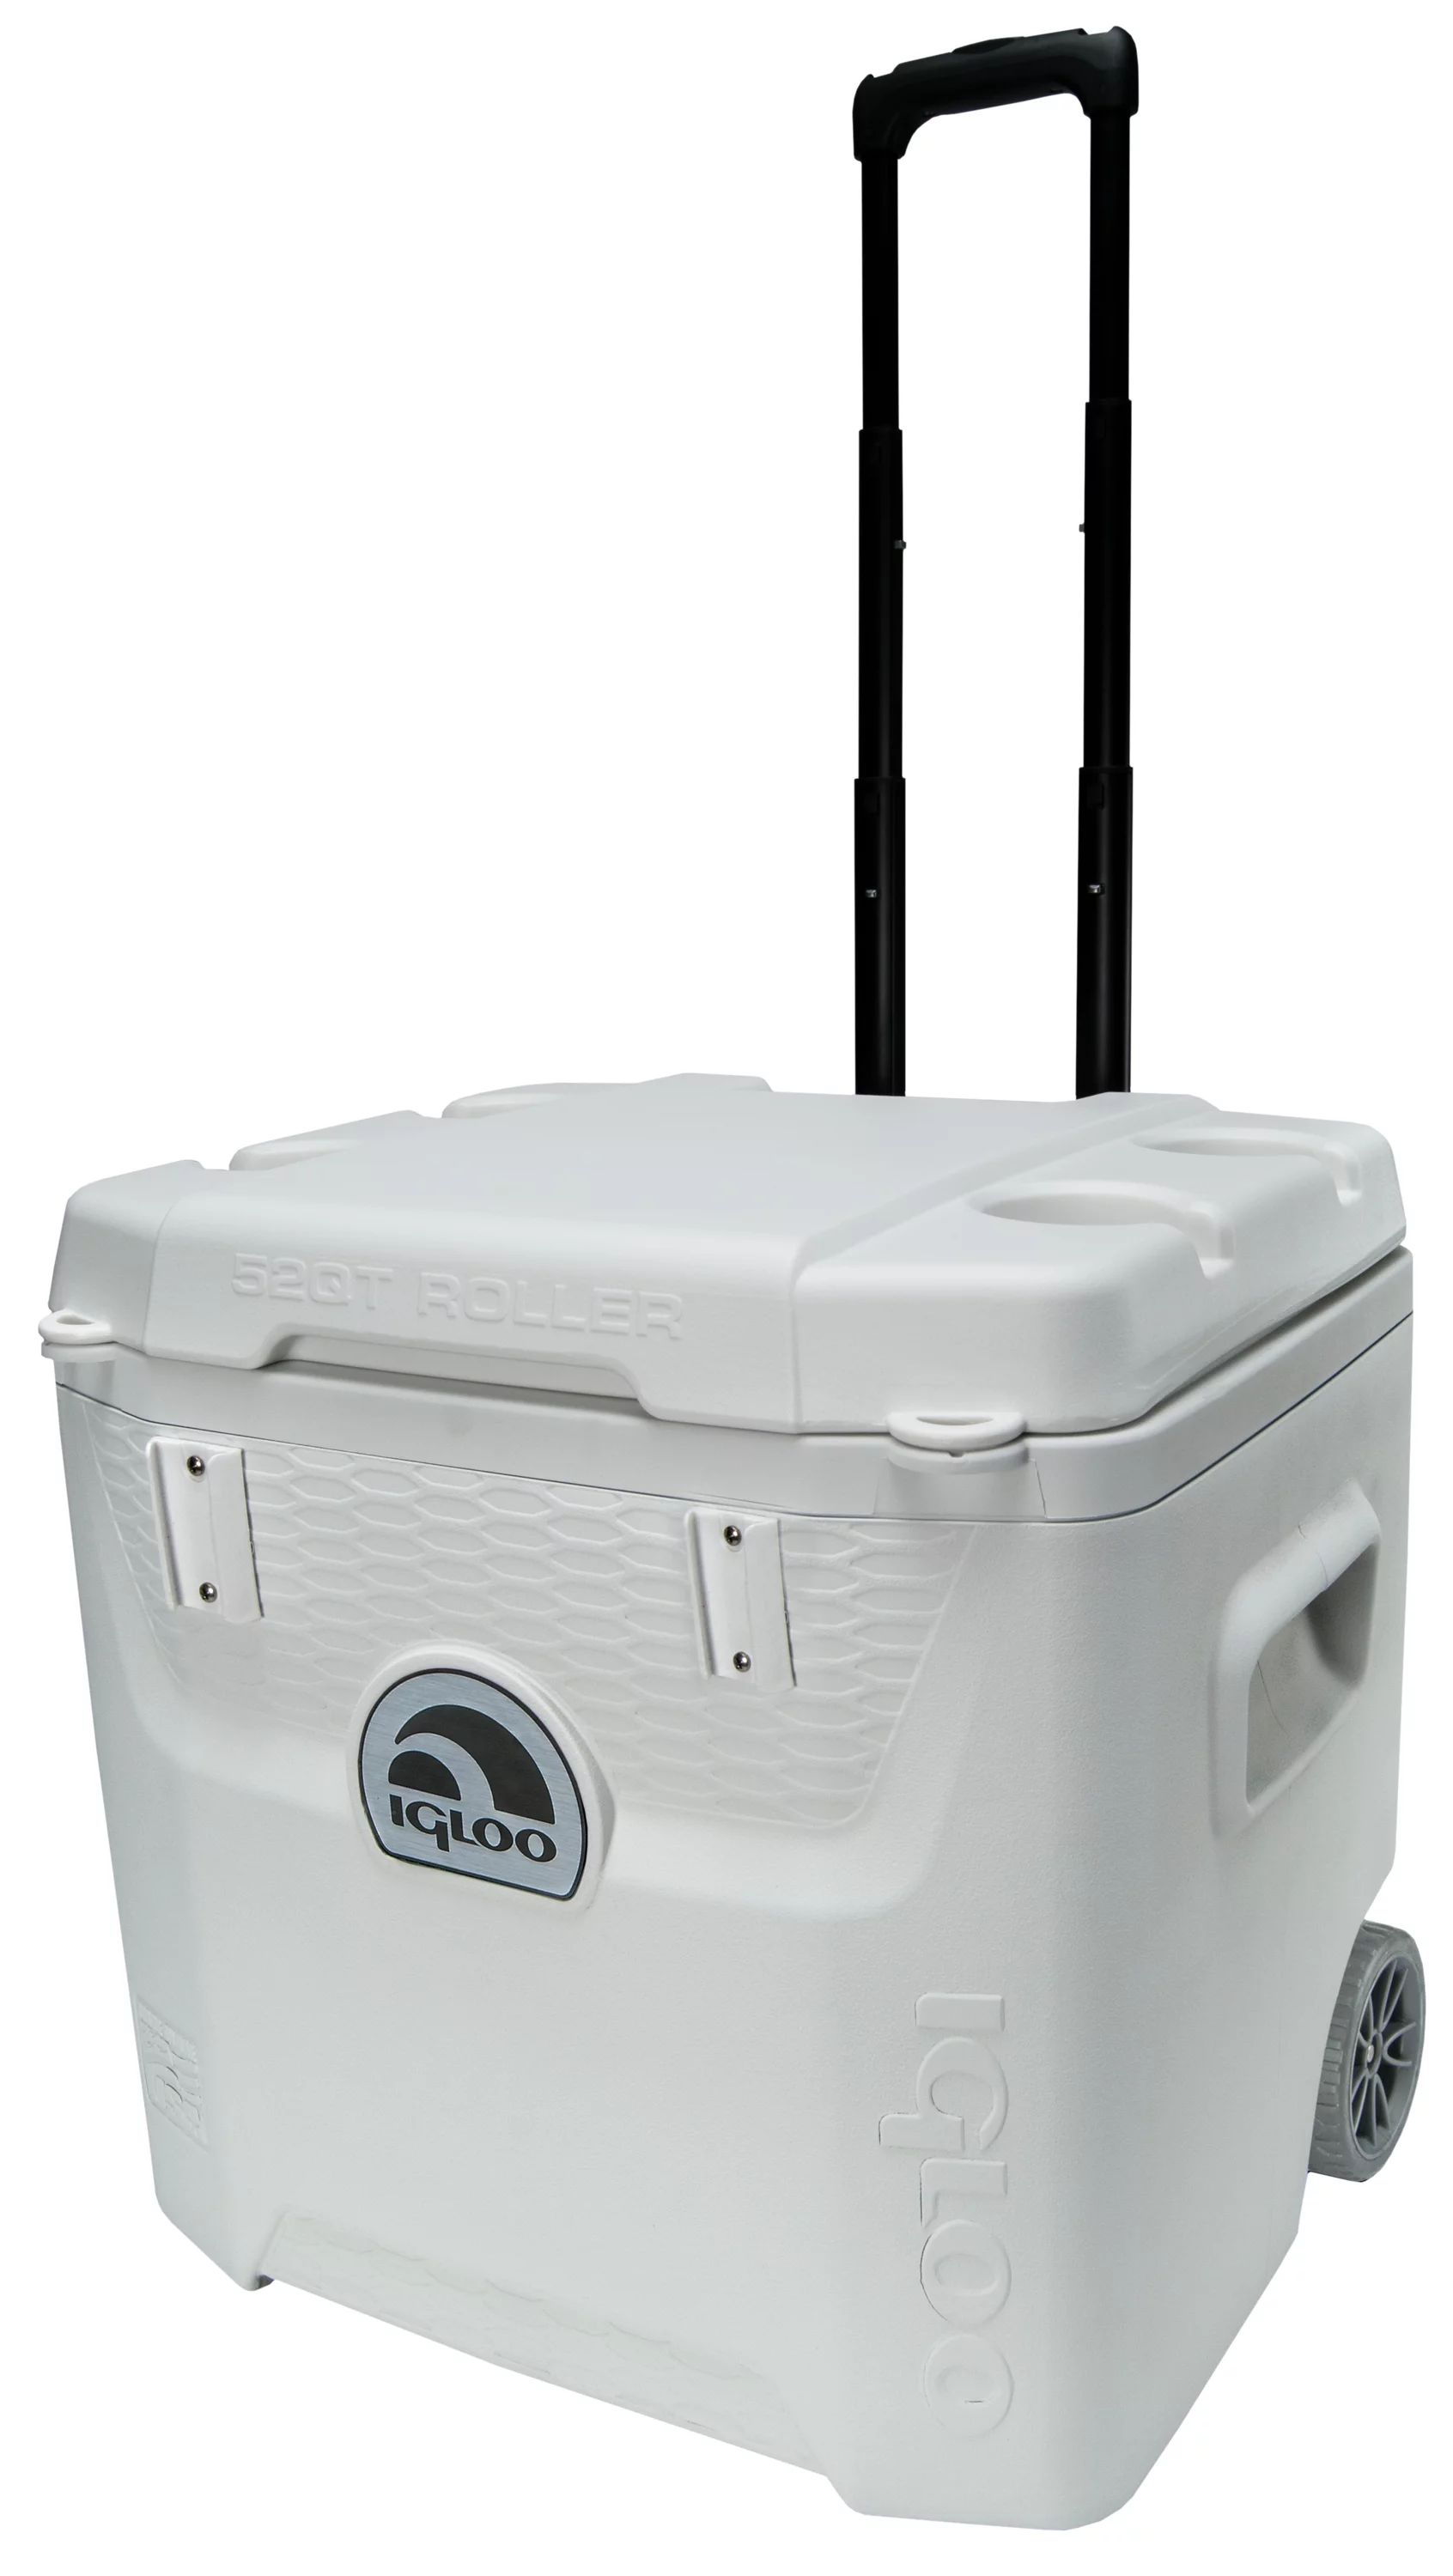 Igloo 52 Qt 5-Day Marine Ice Chest Cooler with Wheels, White | Walmart (US)